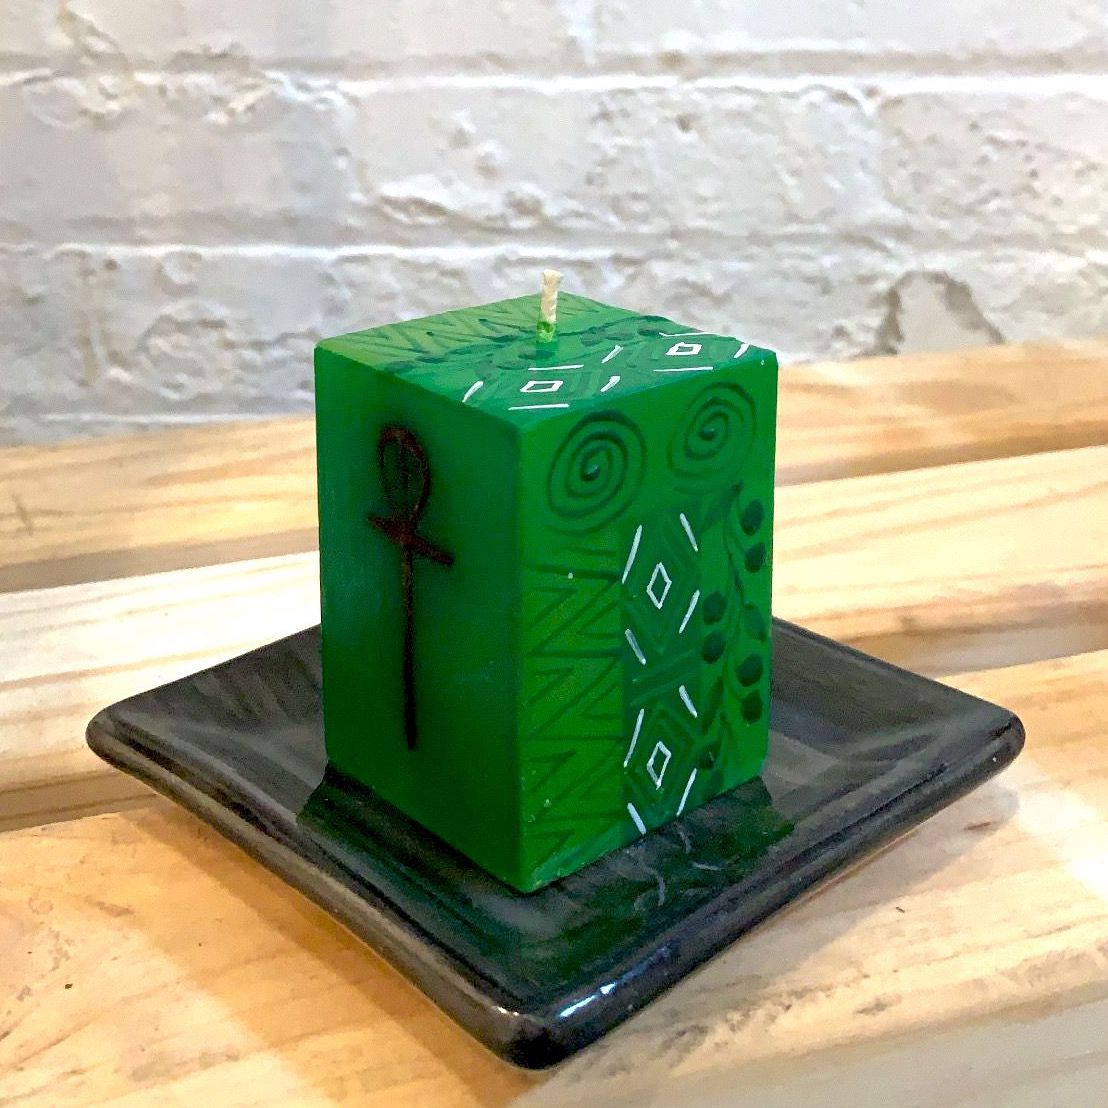 Kwanzaa green 2x2x3 cube candle showing symbol on the front and flower design down the sides.  Sitting on a black candle coaster.  